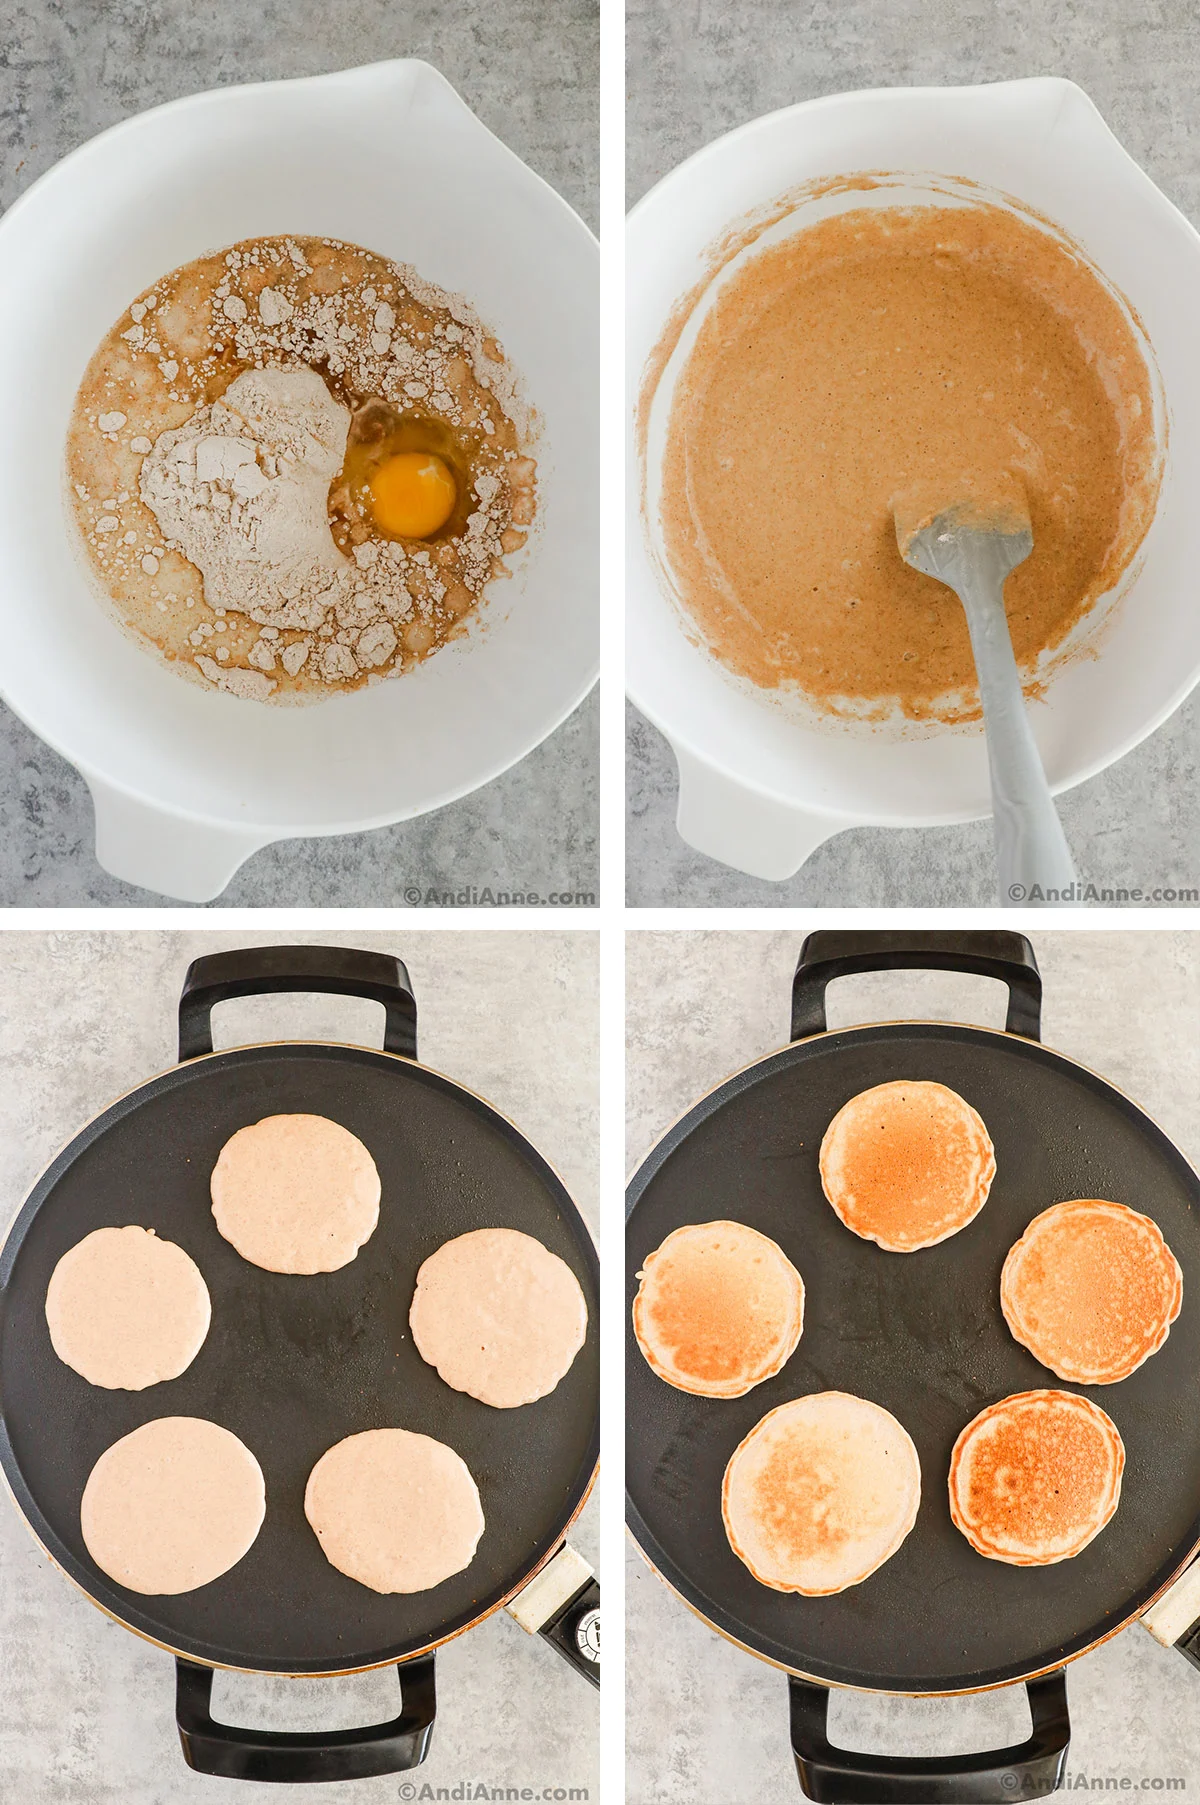 Four images grouped together. First two are a bowl with pancake ingredients unmixed and then mixed. Second two are a skillet, first with uncooked pancakes and then with golden brown pancakes.